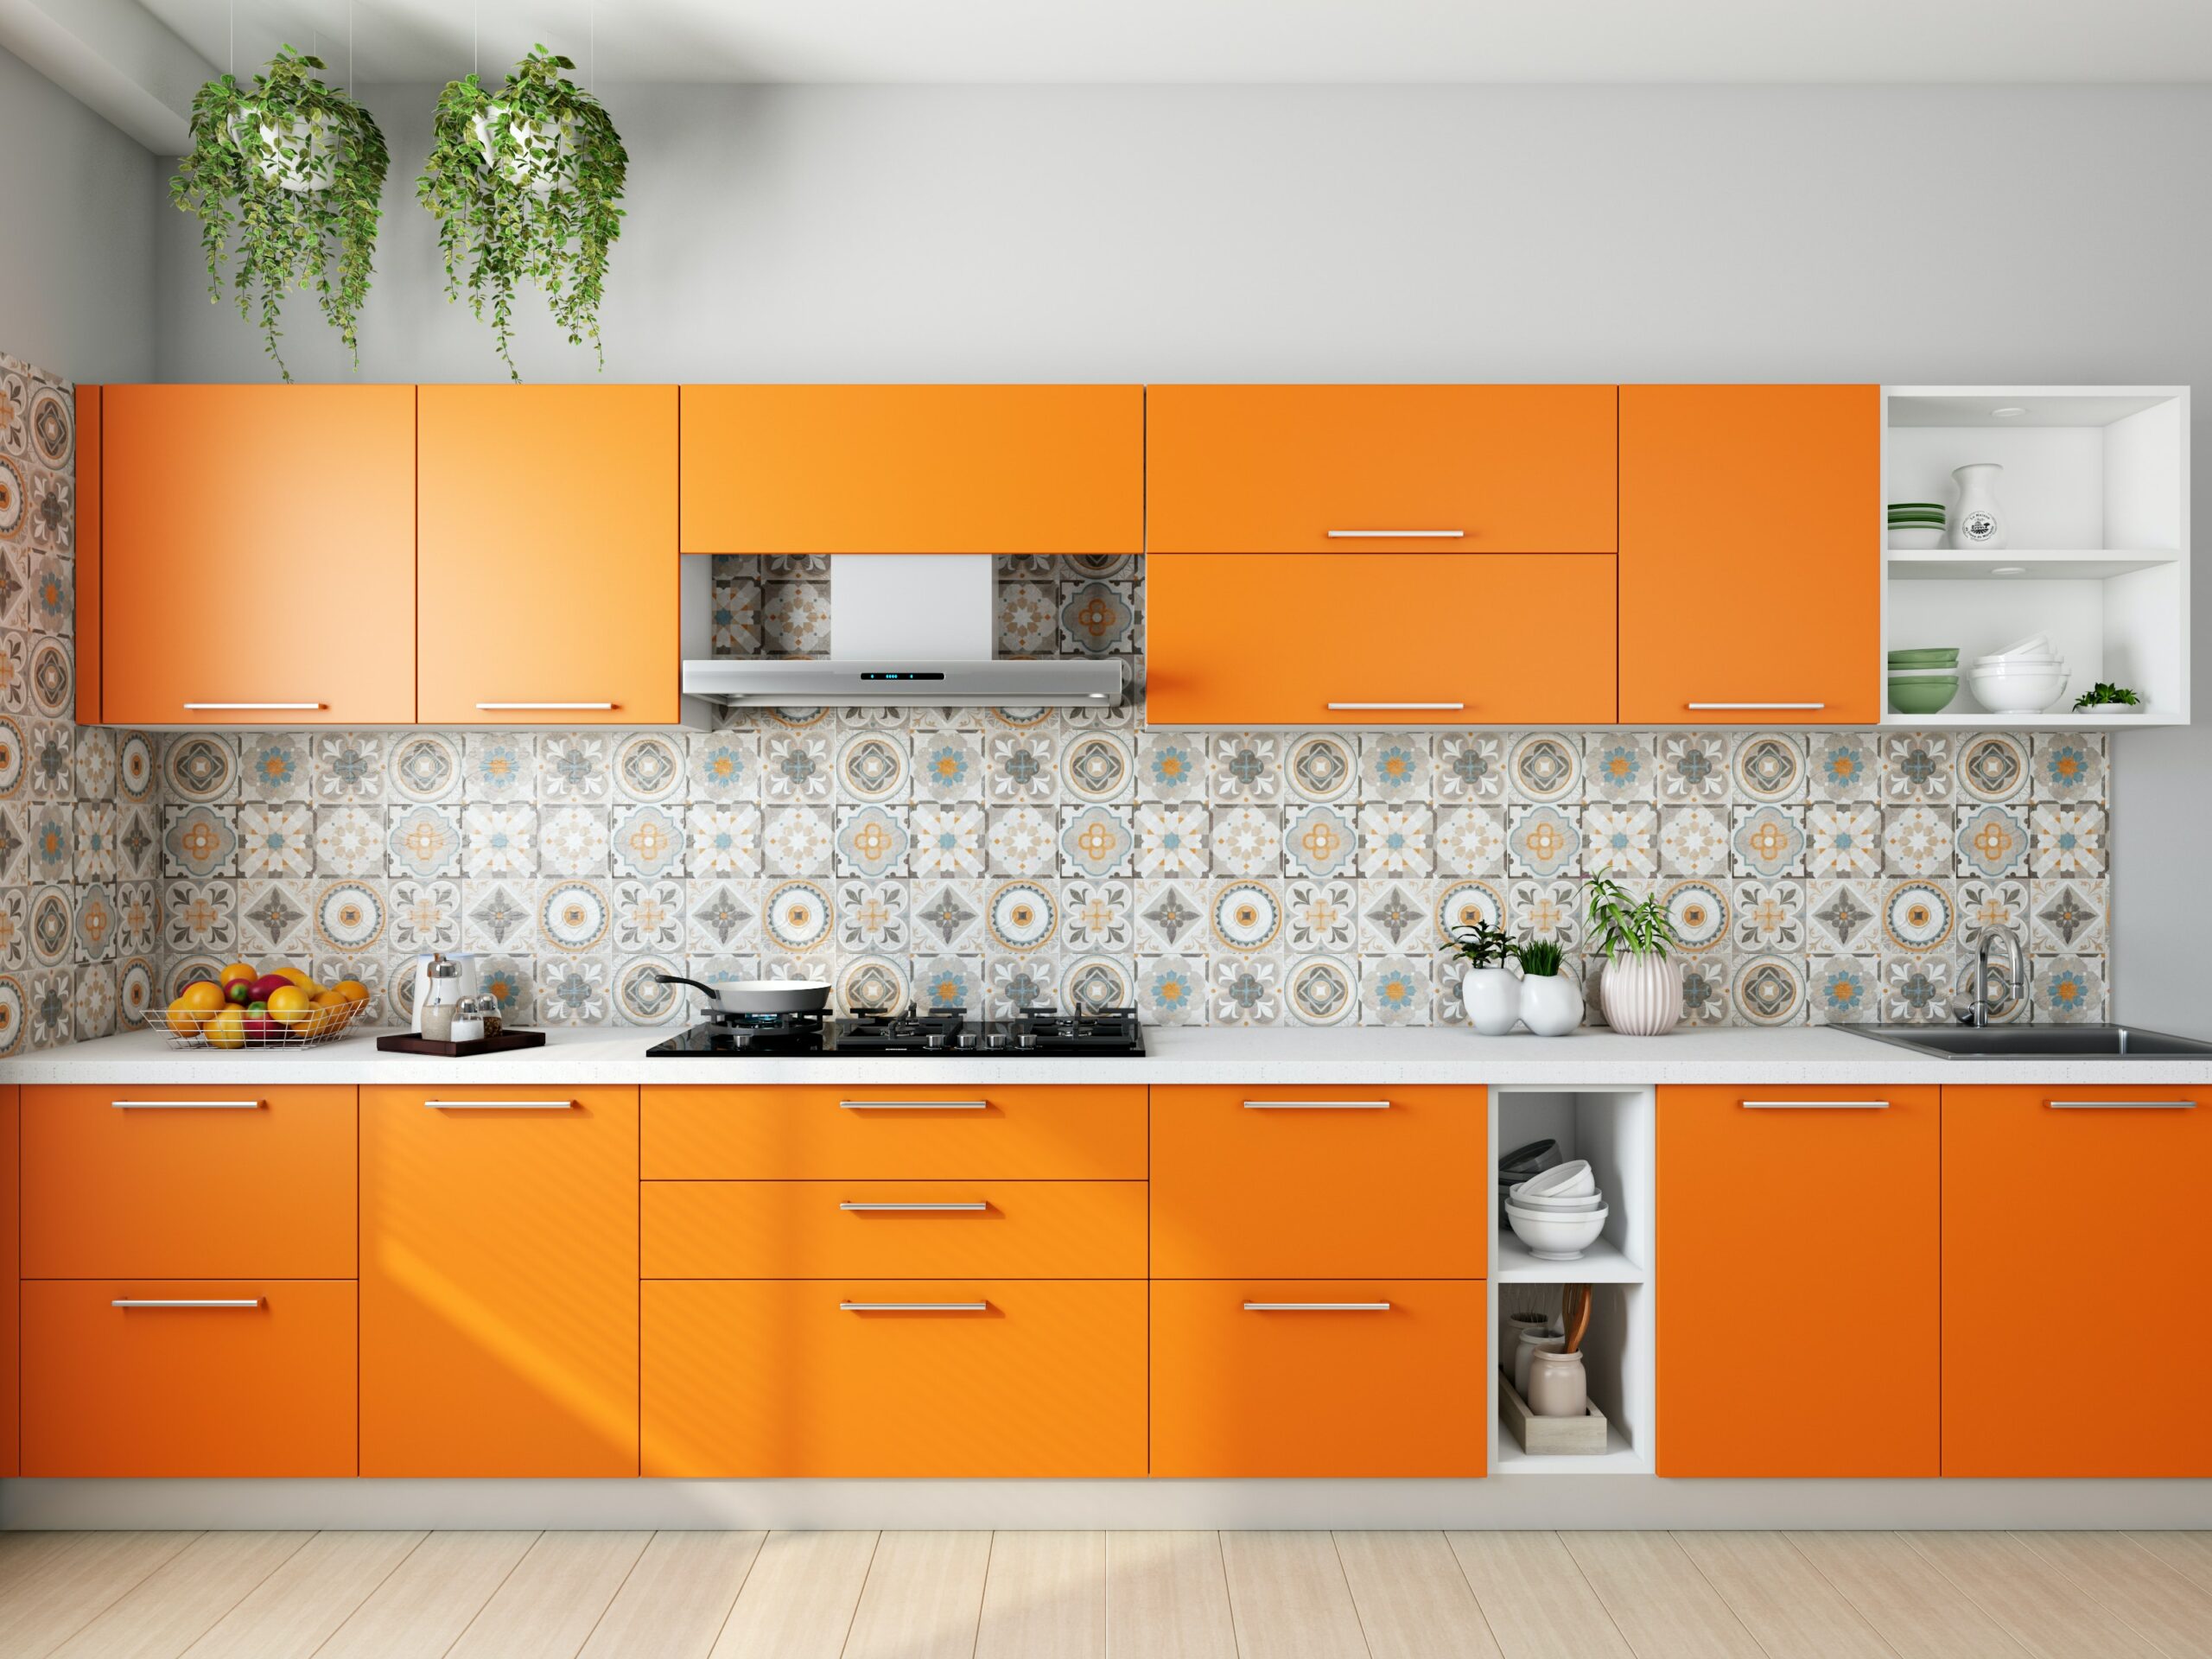 https://www.forbesglobalproperties.com/wp-content/uploads/2022/12/orange_kitchen_cabinetry-scaled.jpg